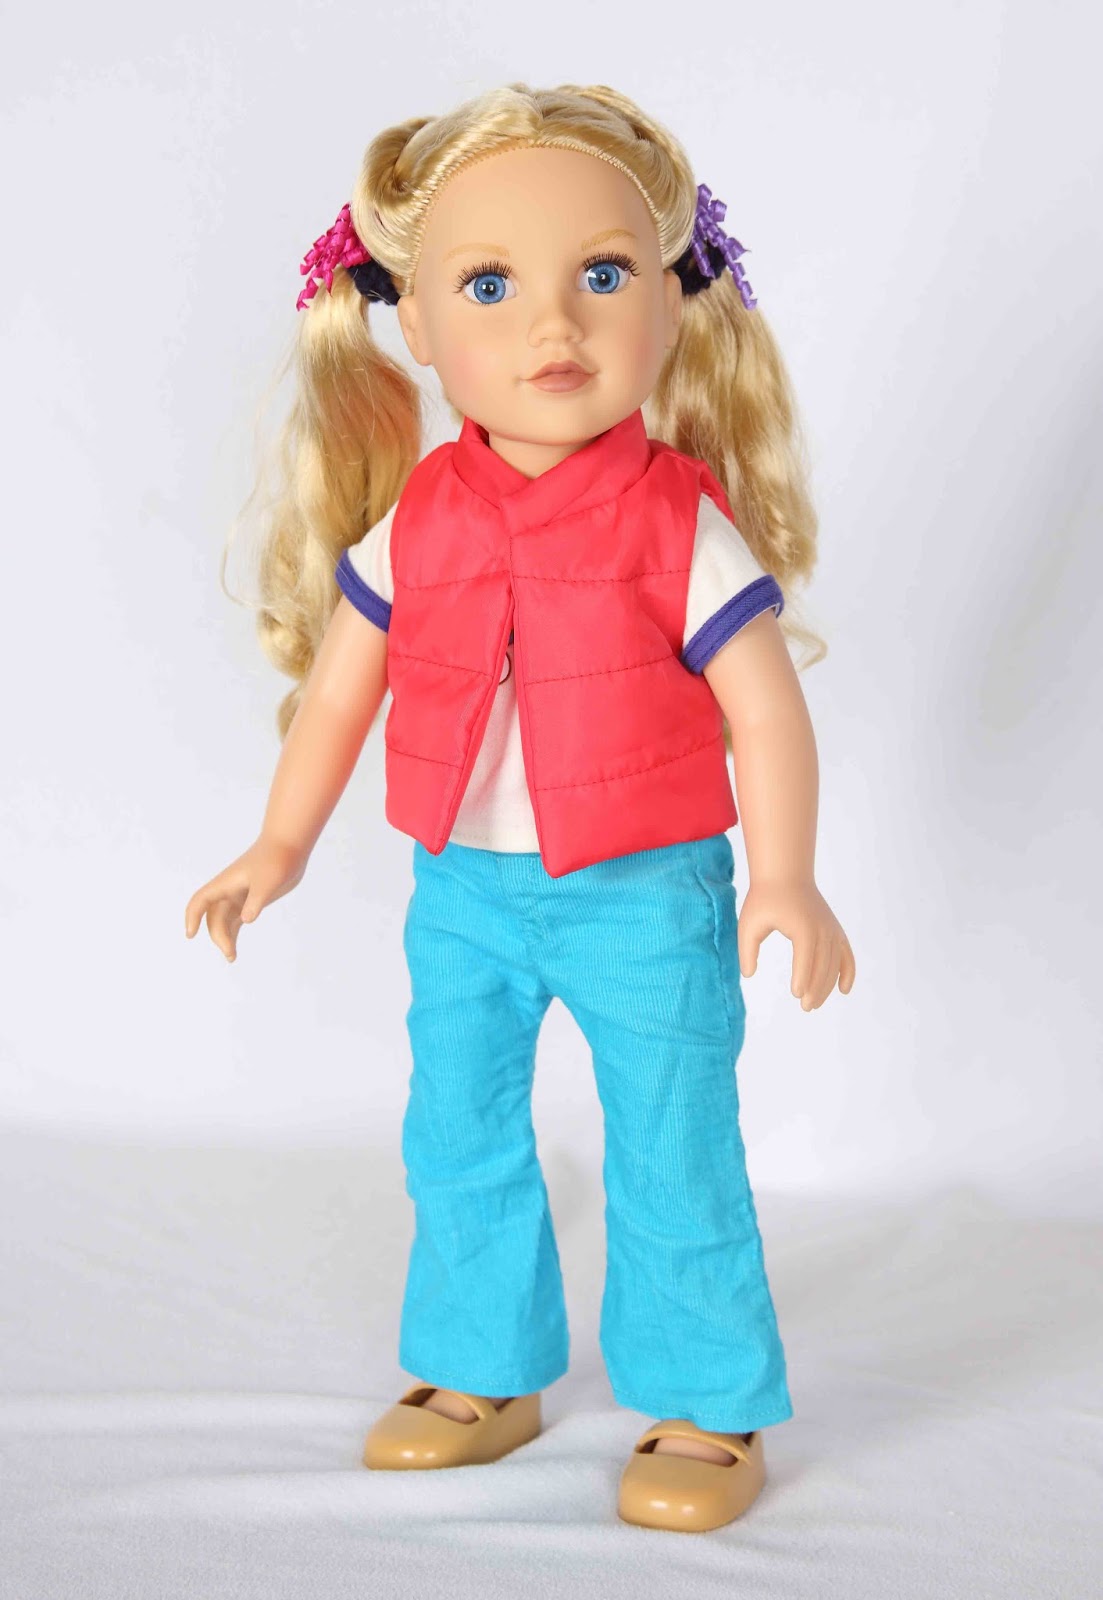 My Journey Girls Dolls Adventures: Meredith Wearing Our Generation's ...